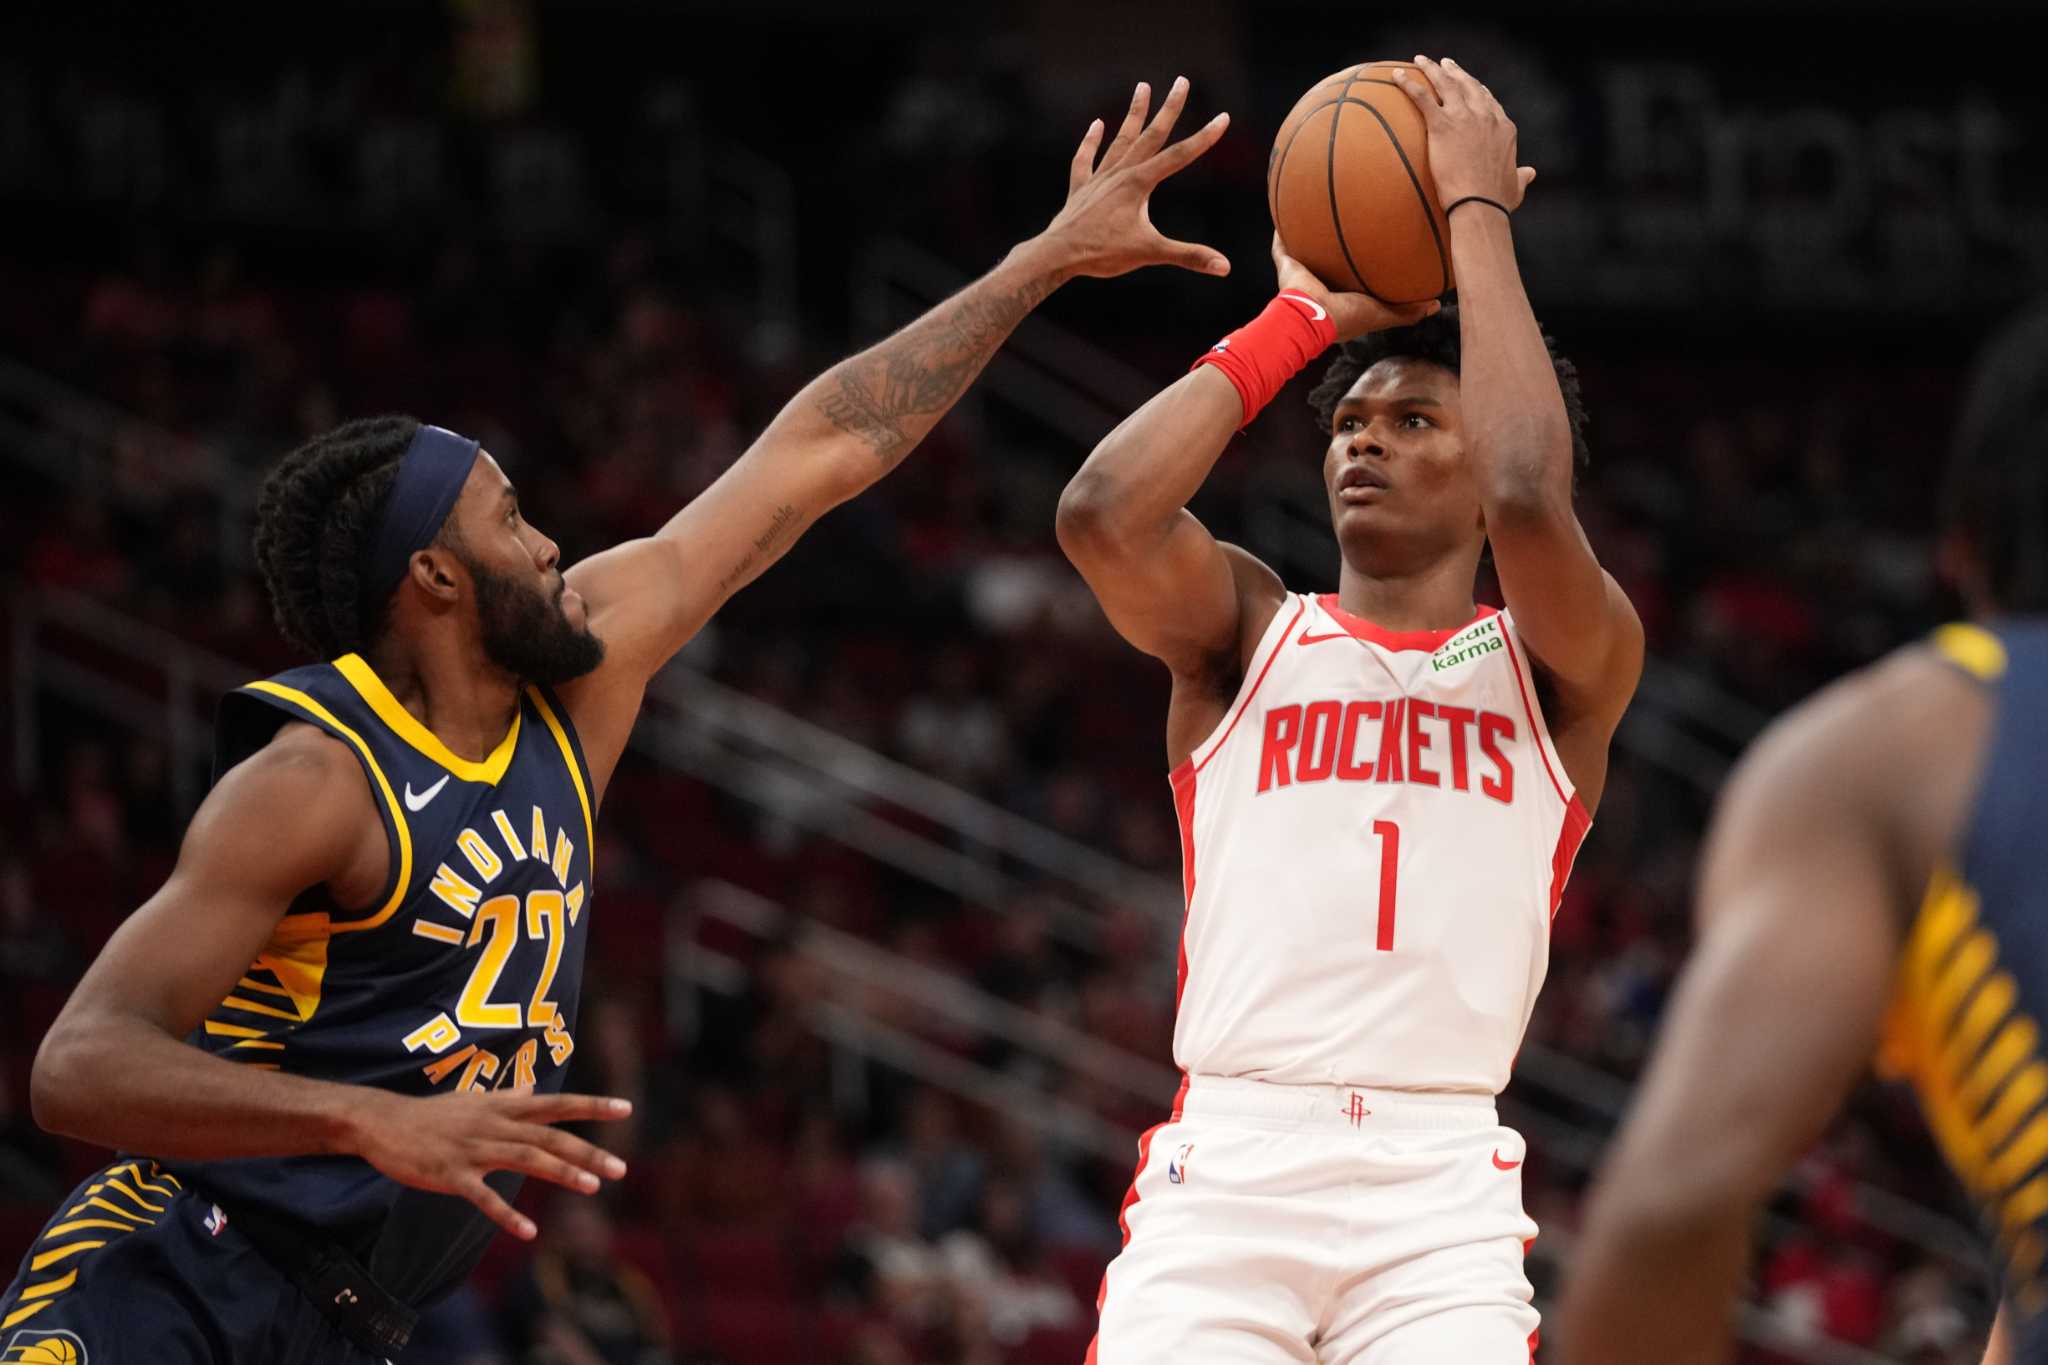 Pacers 91, Rockets 90